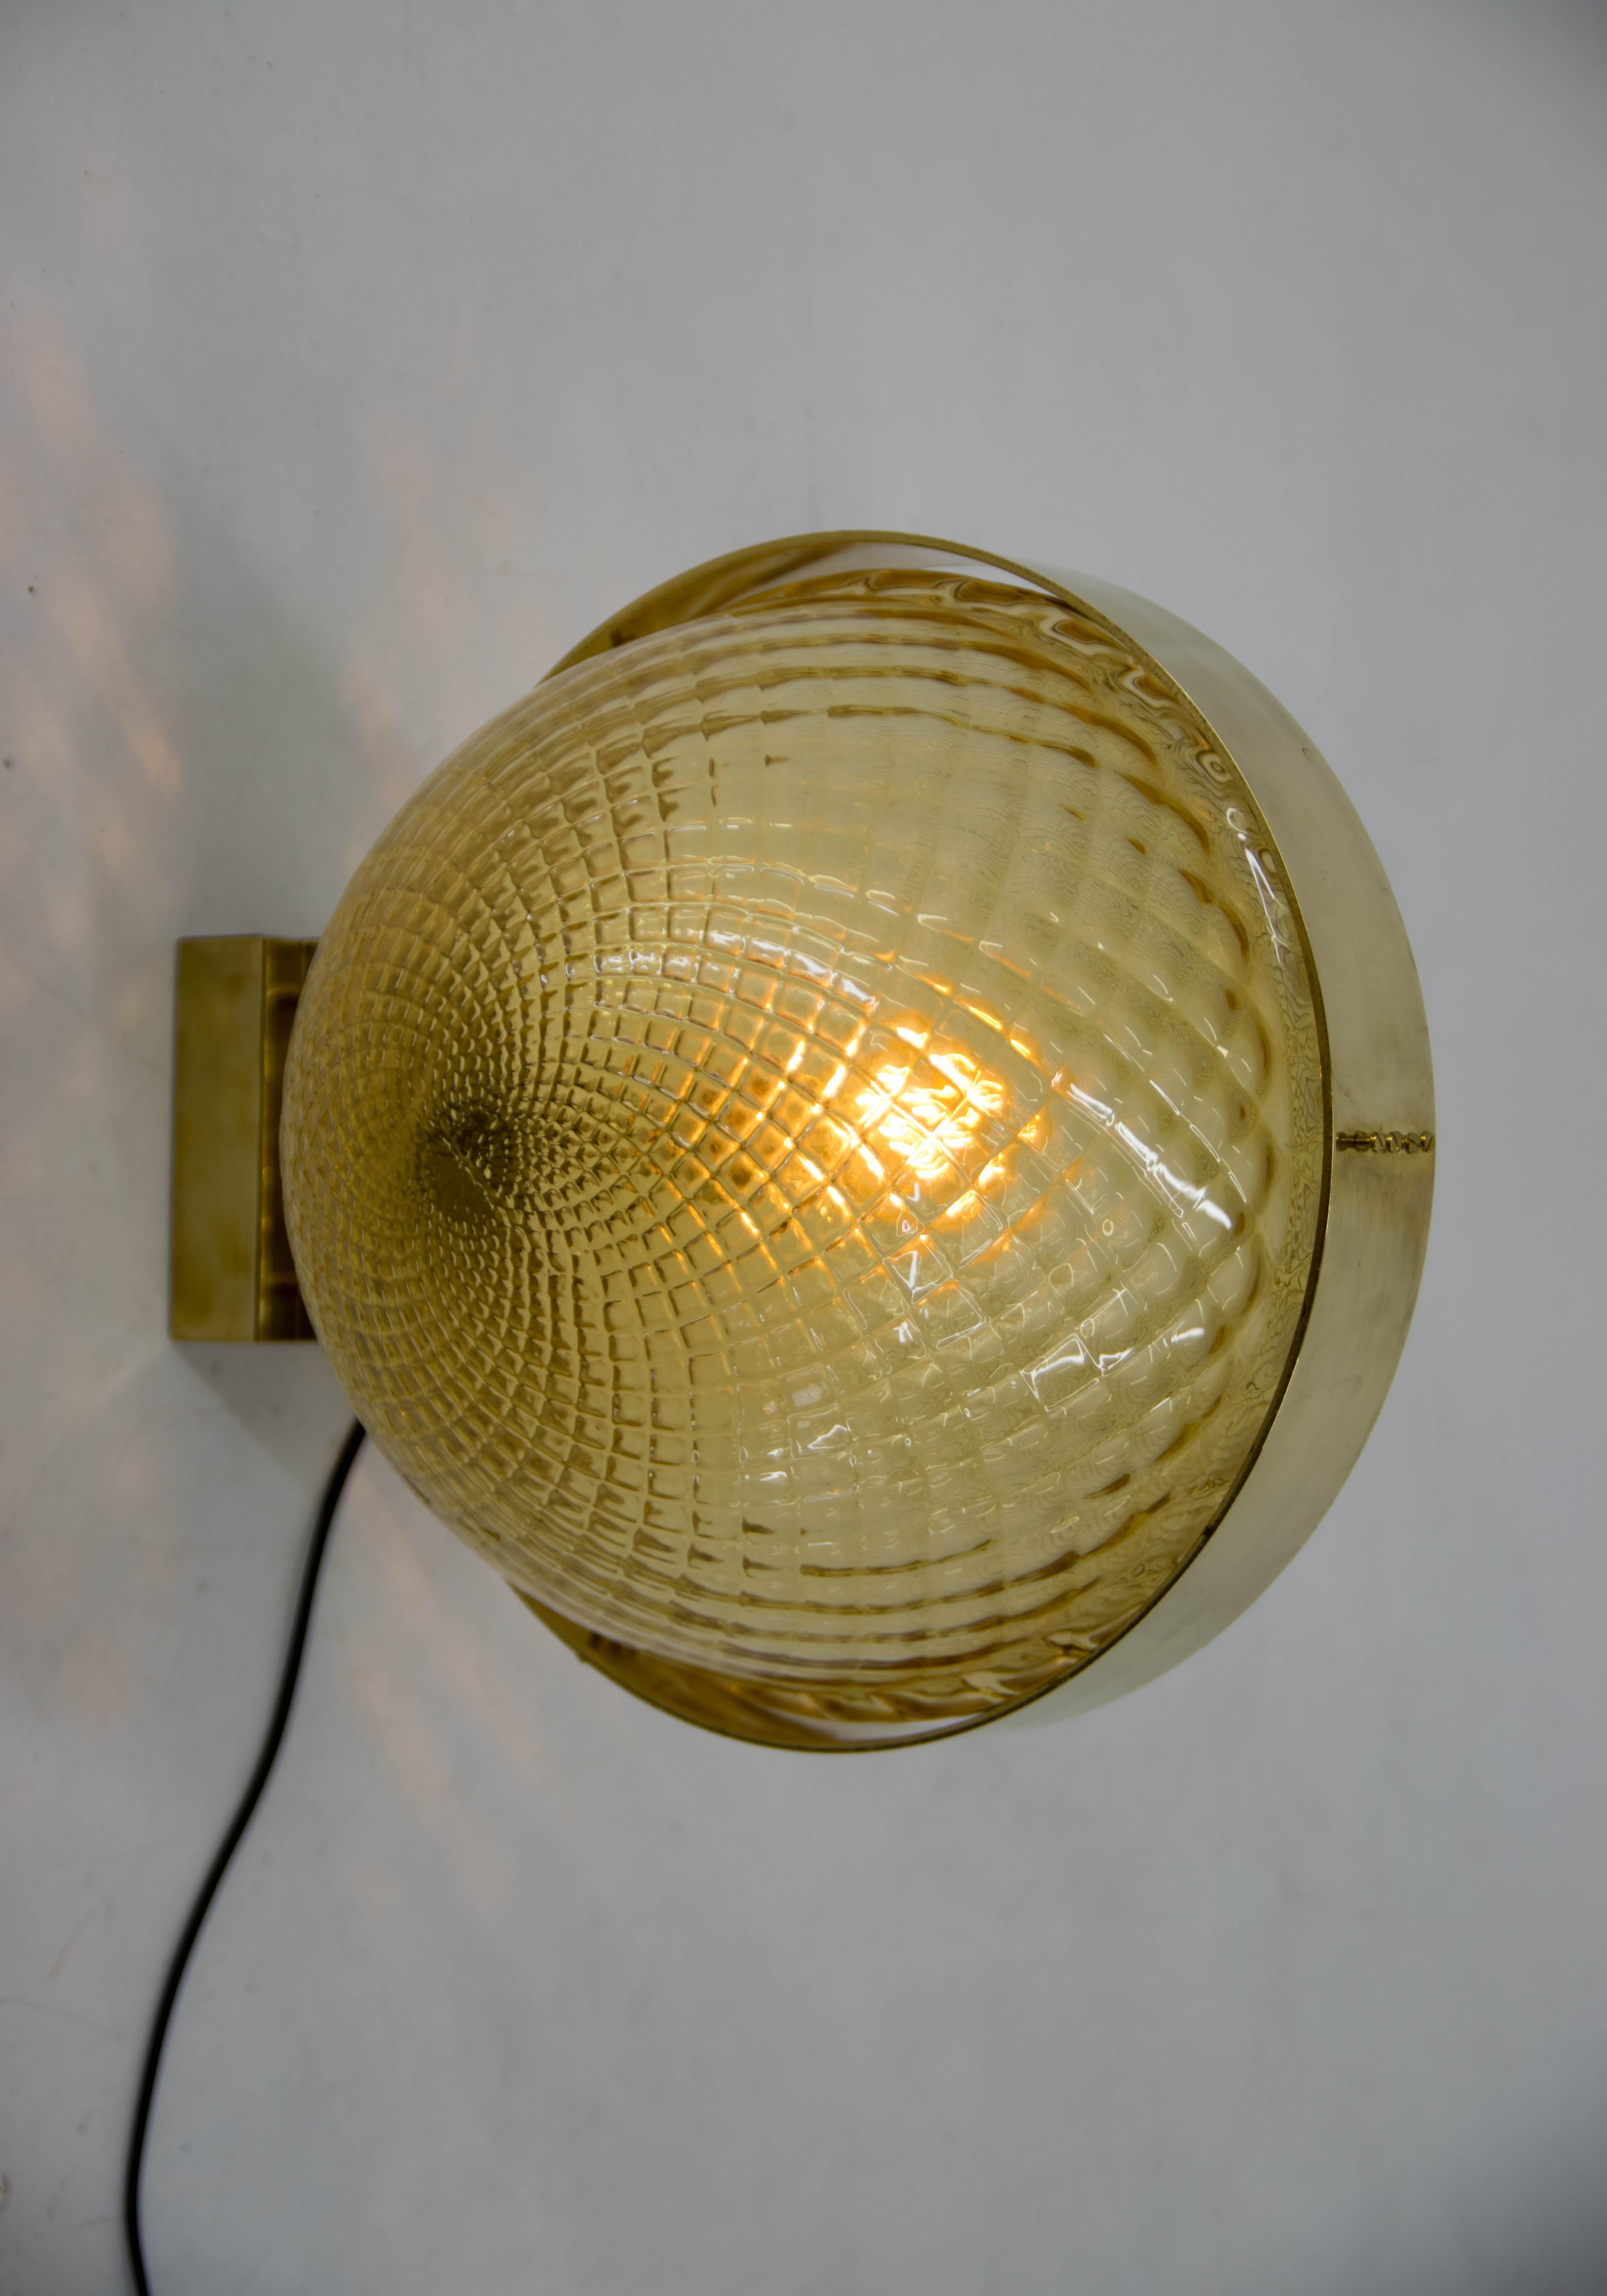 Mid-Century Modern wall lamp made of blown glass and polished brass. Four items available
Very good original condition.
1x100W, E25-E27 bulb
US wiring compatible.